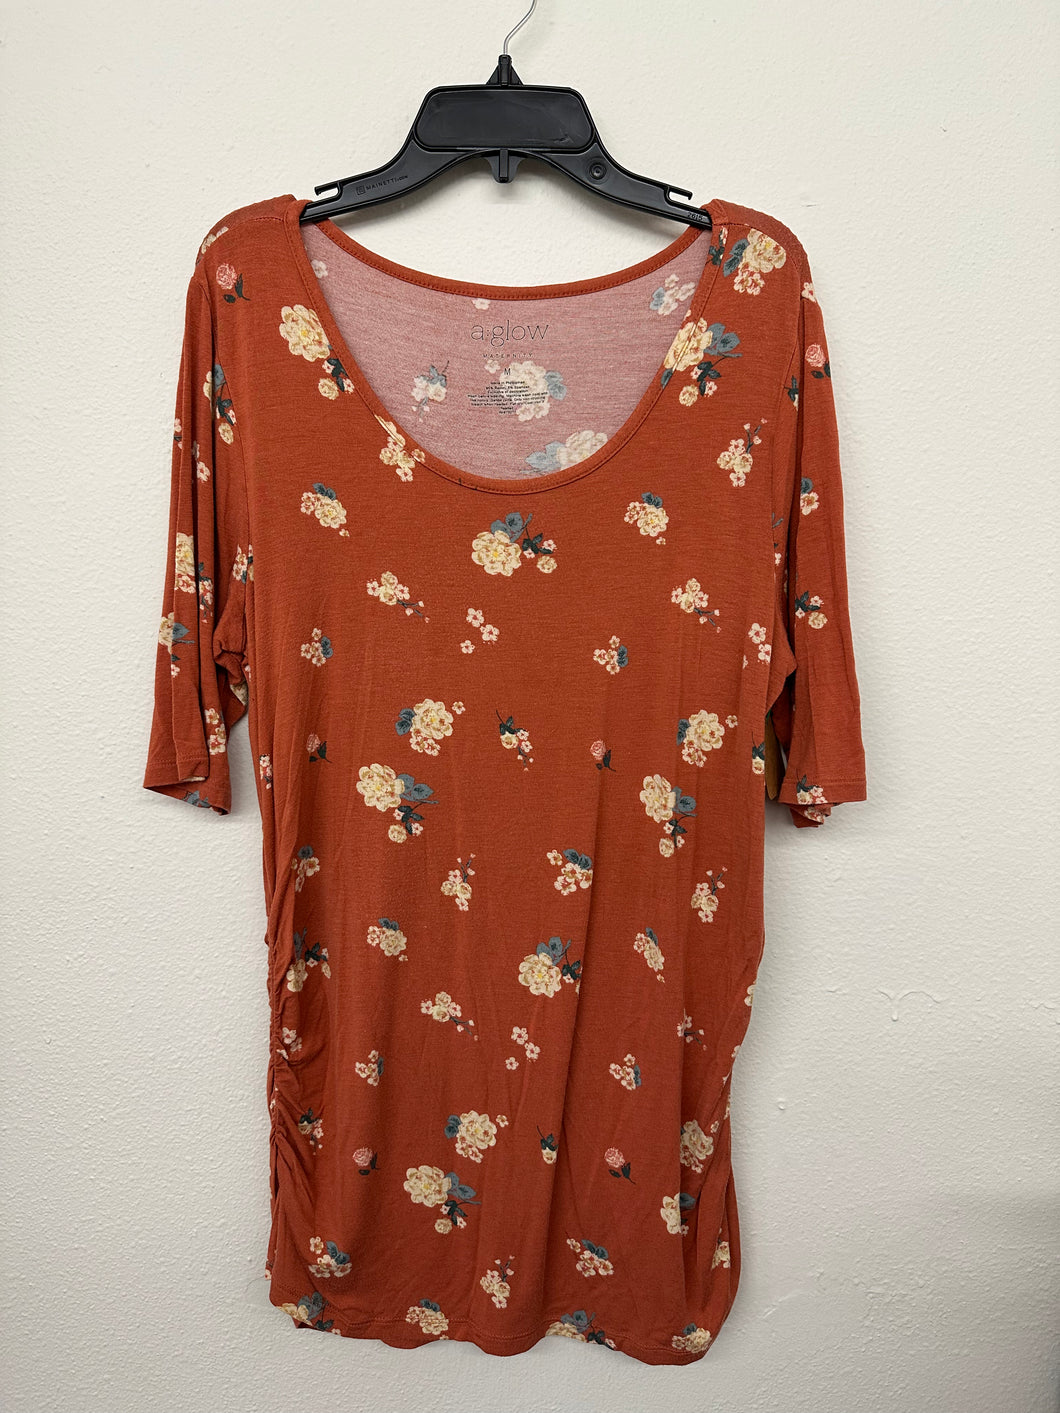 Floral Rust Top- M